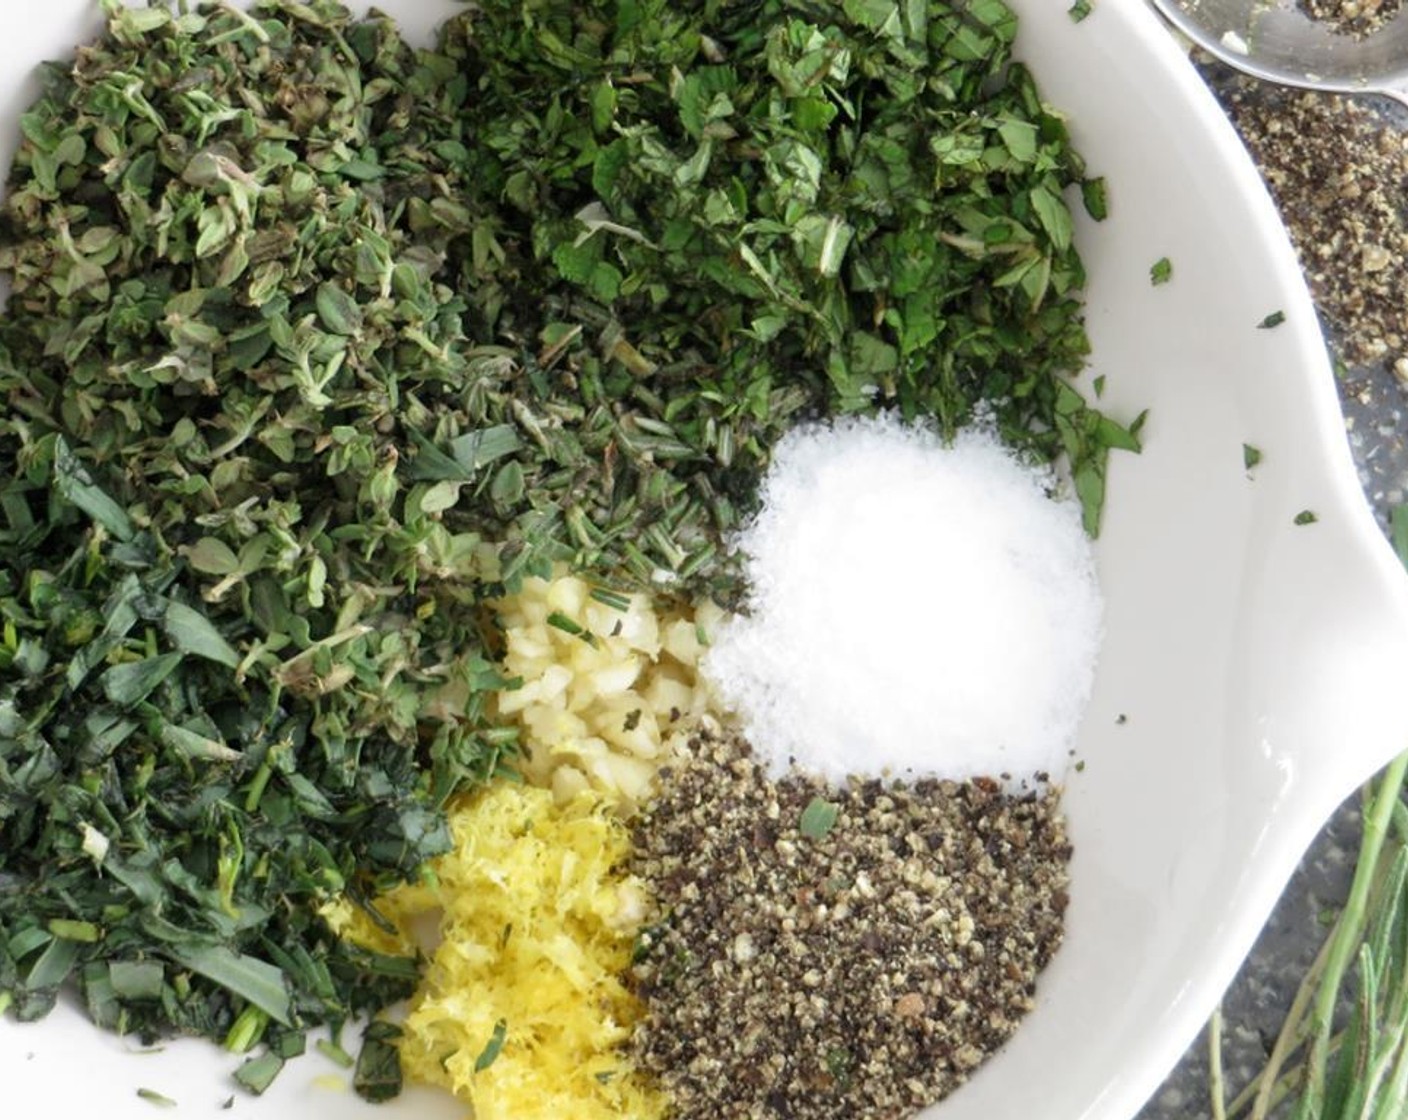 step 1 For the marinade, combine Garlic (4 cloves), Lemon (1), Fresh Rosemary (1 1/2 Tbsp), Tarragon (1 Tbsp), Fresh Thyme Leaves (2 Tbsp), Fresh Mint Leaves (1 Tbsp), Kosher Salt (1/2 tsp) and Ground Black Pepper (1/2 tsp) in a bowl and toss together with your fingers.